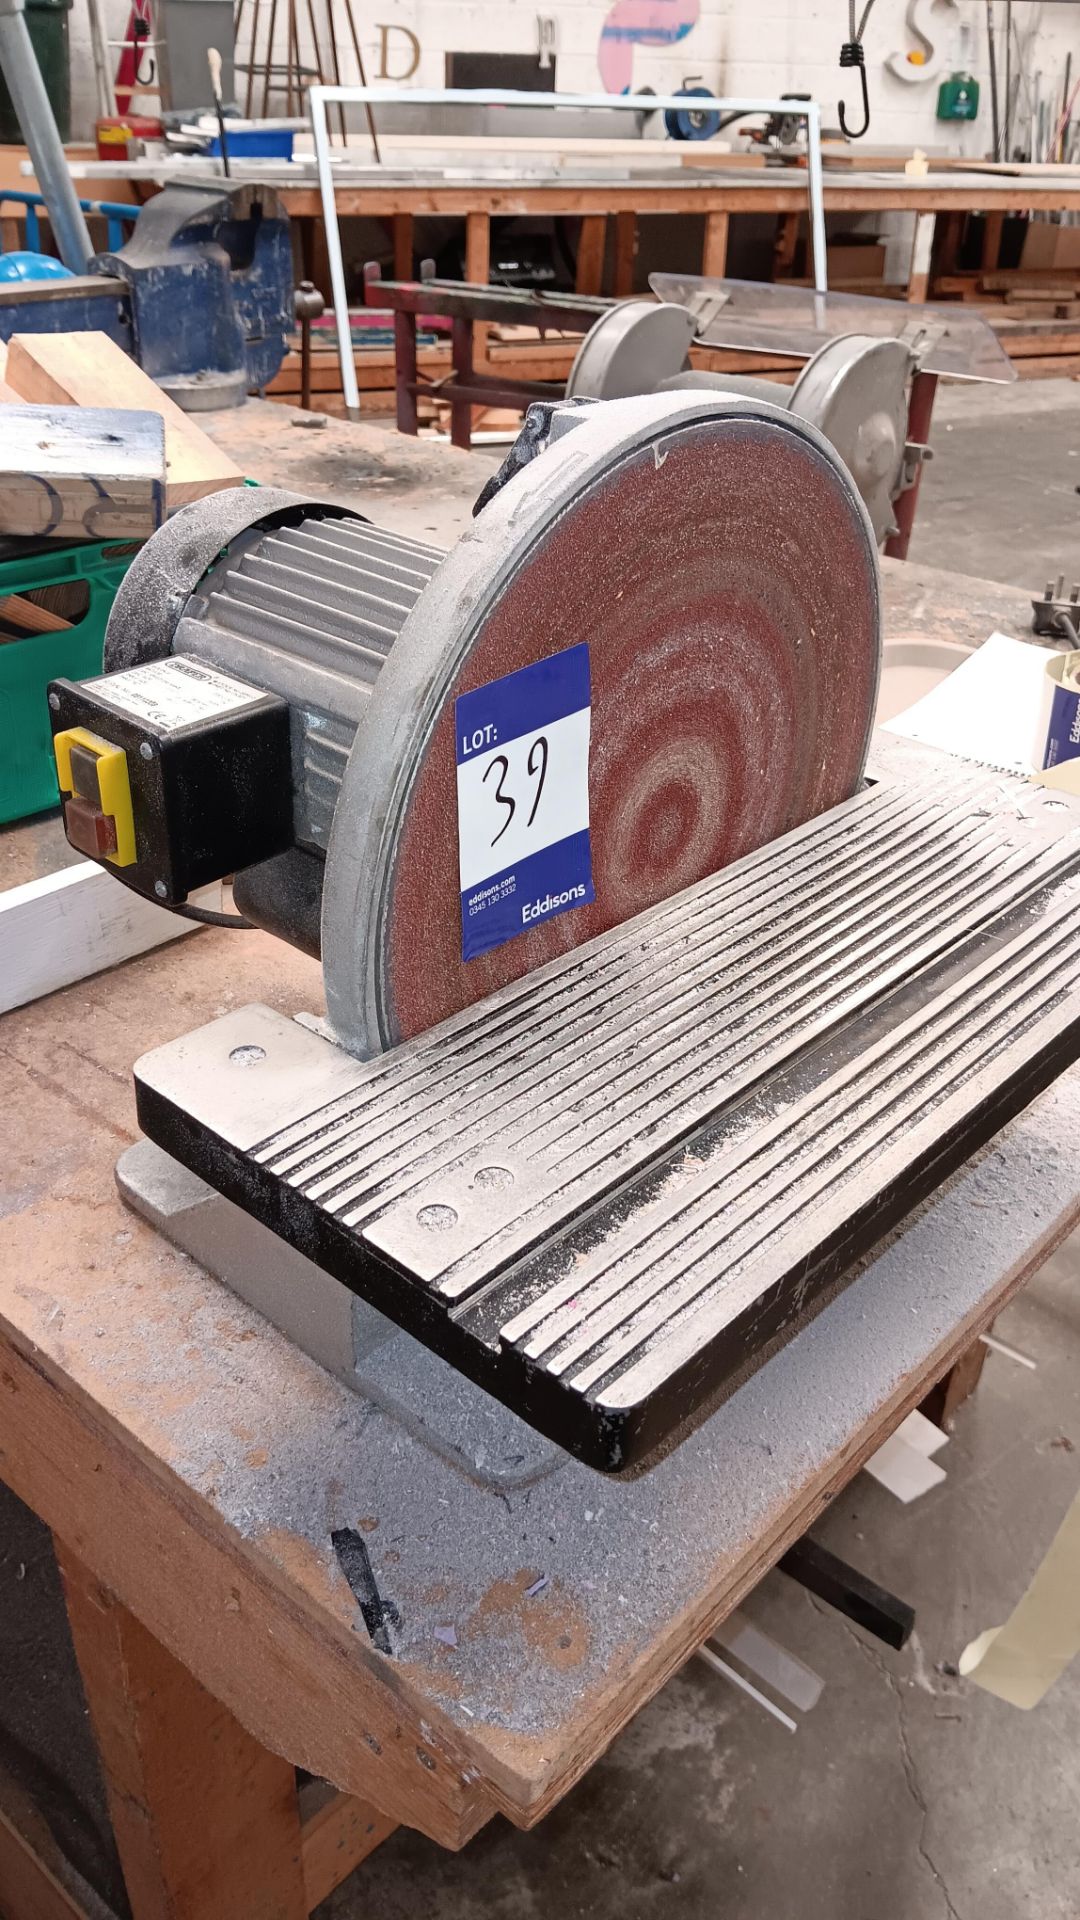 Draper 88912 DS305 750w 305mm disc sander, serial number 05110308, 240v – Located in Unit 3 - Image 2 of 3